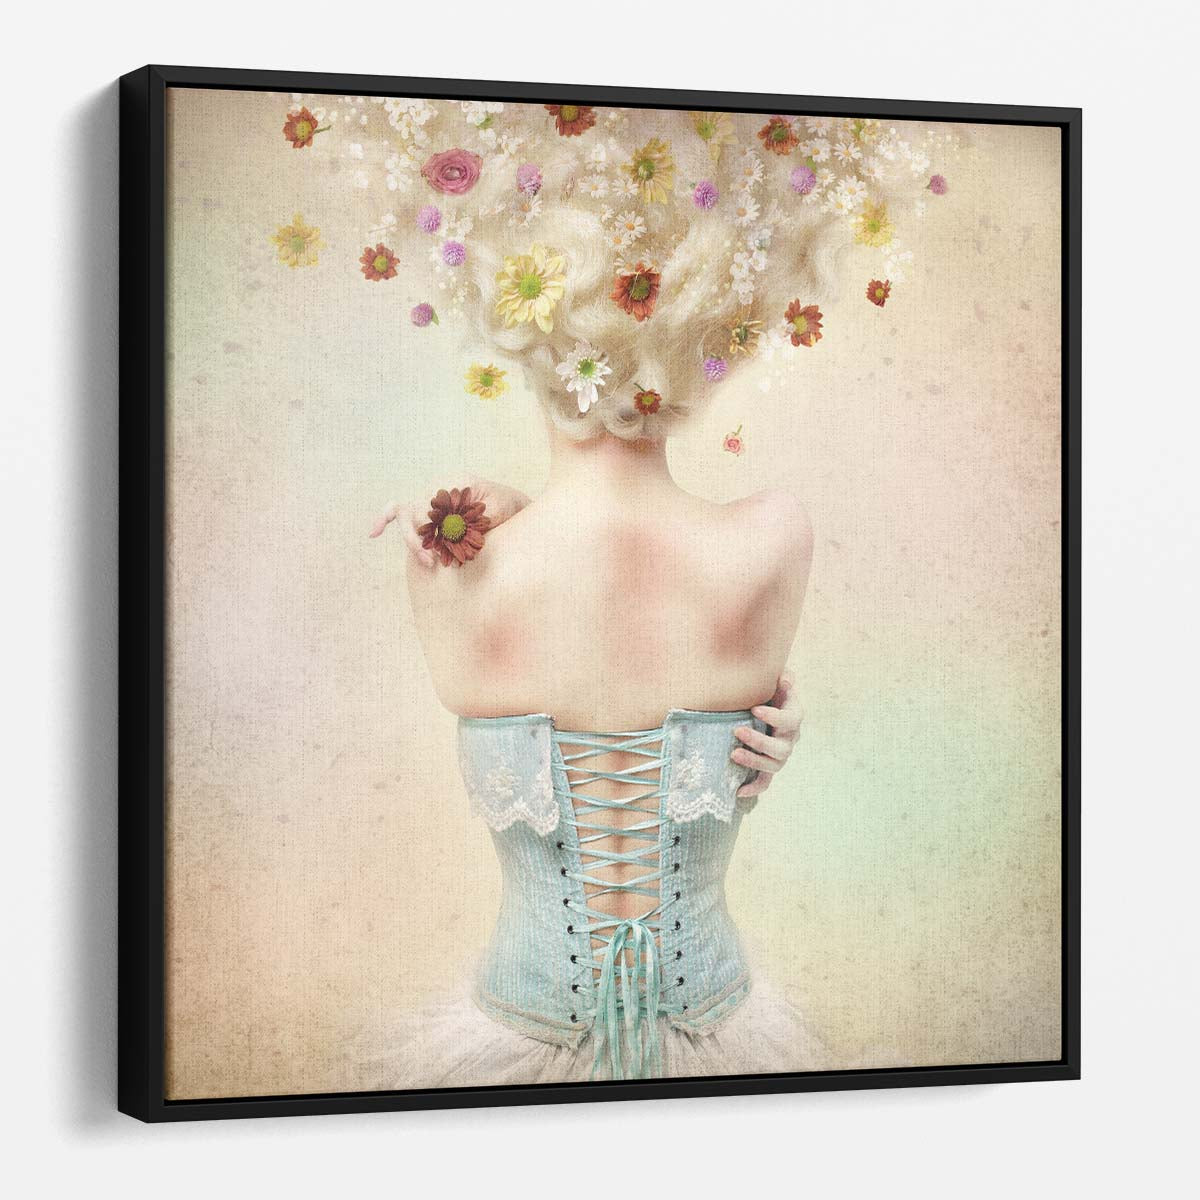 Classic Corseted Woman in Spring Floral Garden Portrait Wall Art by Luxuriance Designs. Made in USA.